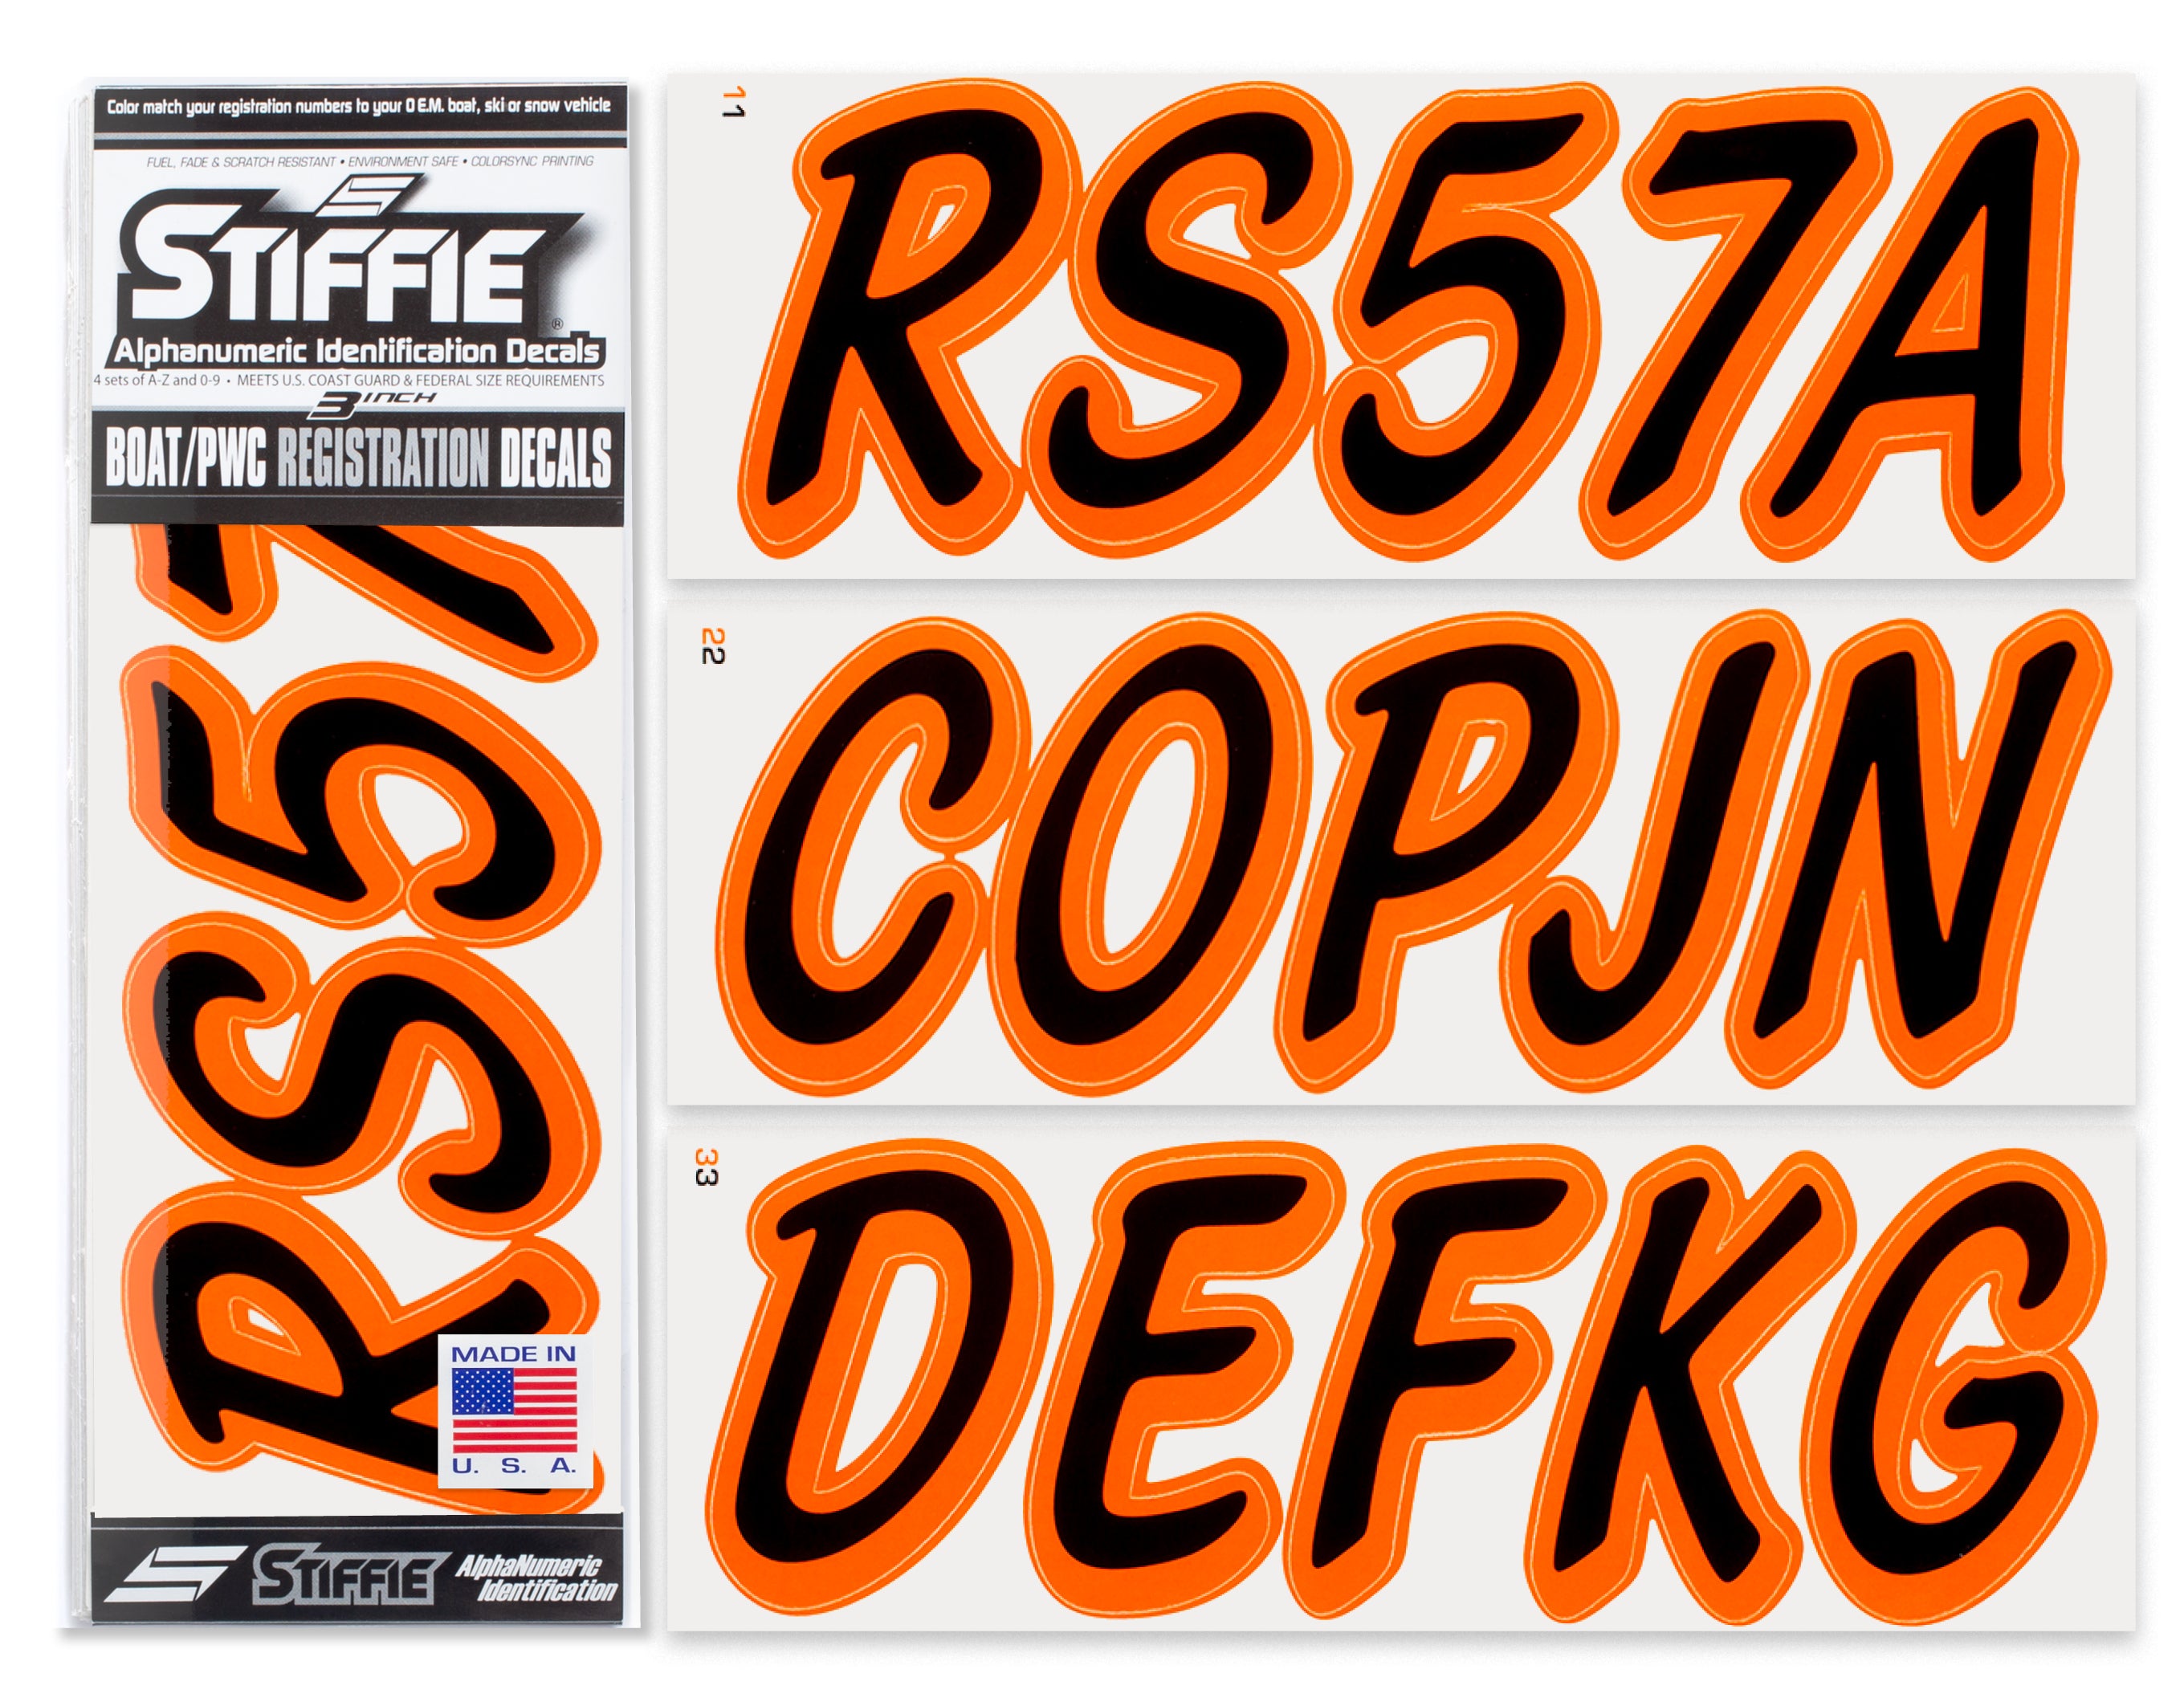 STIFFIE Whipline Solid Black/Orange 3" Alpha-Numeric Registration Identification Numbers Stickers Decals for Boats & Personal Watercraft